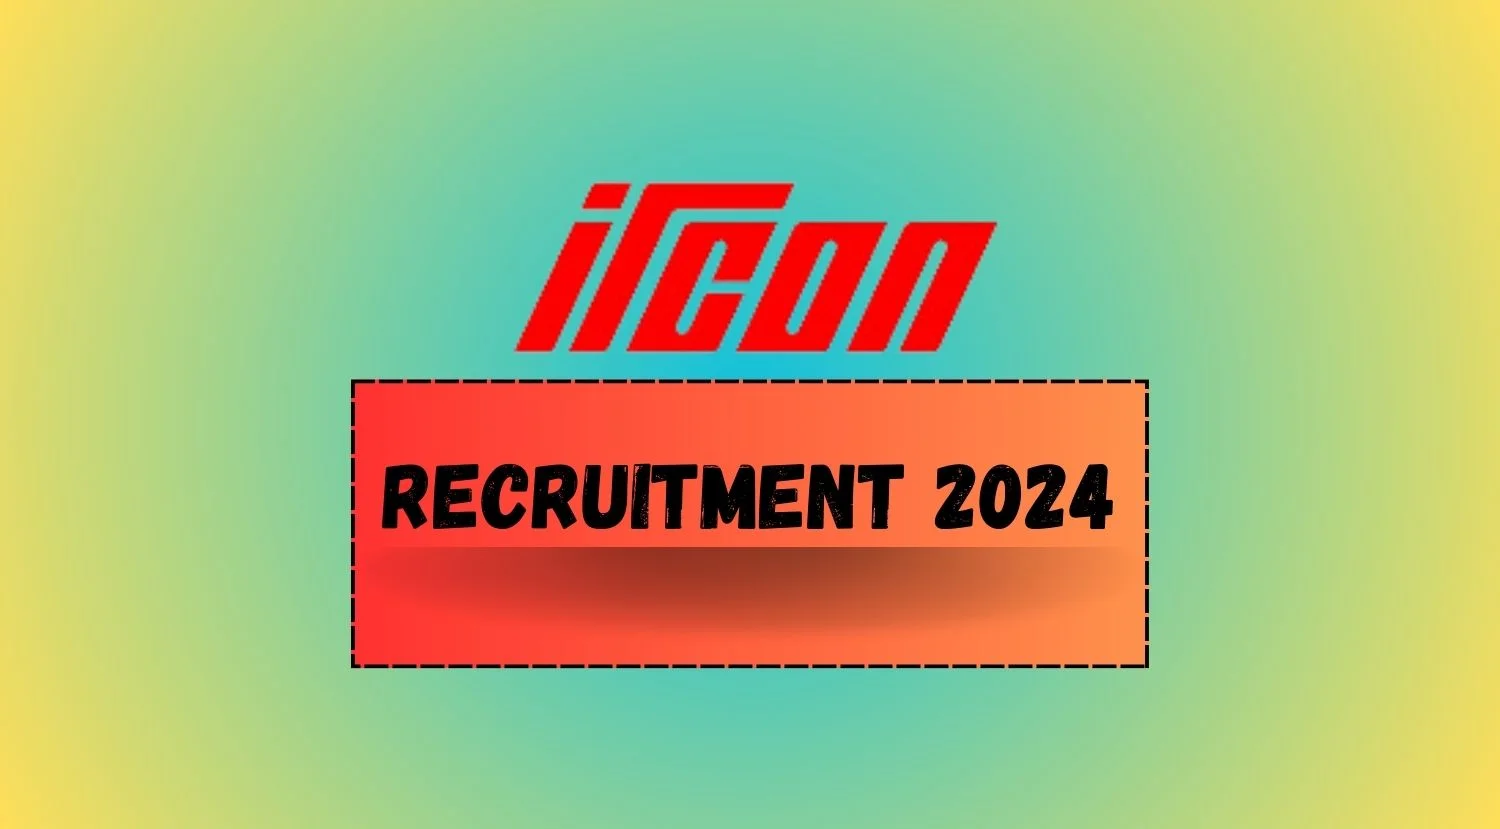 IRCON Recruitment 2024 Notification Eligibility and Walk-in Details